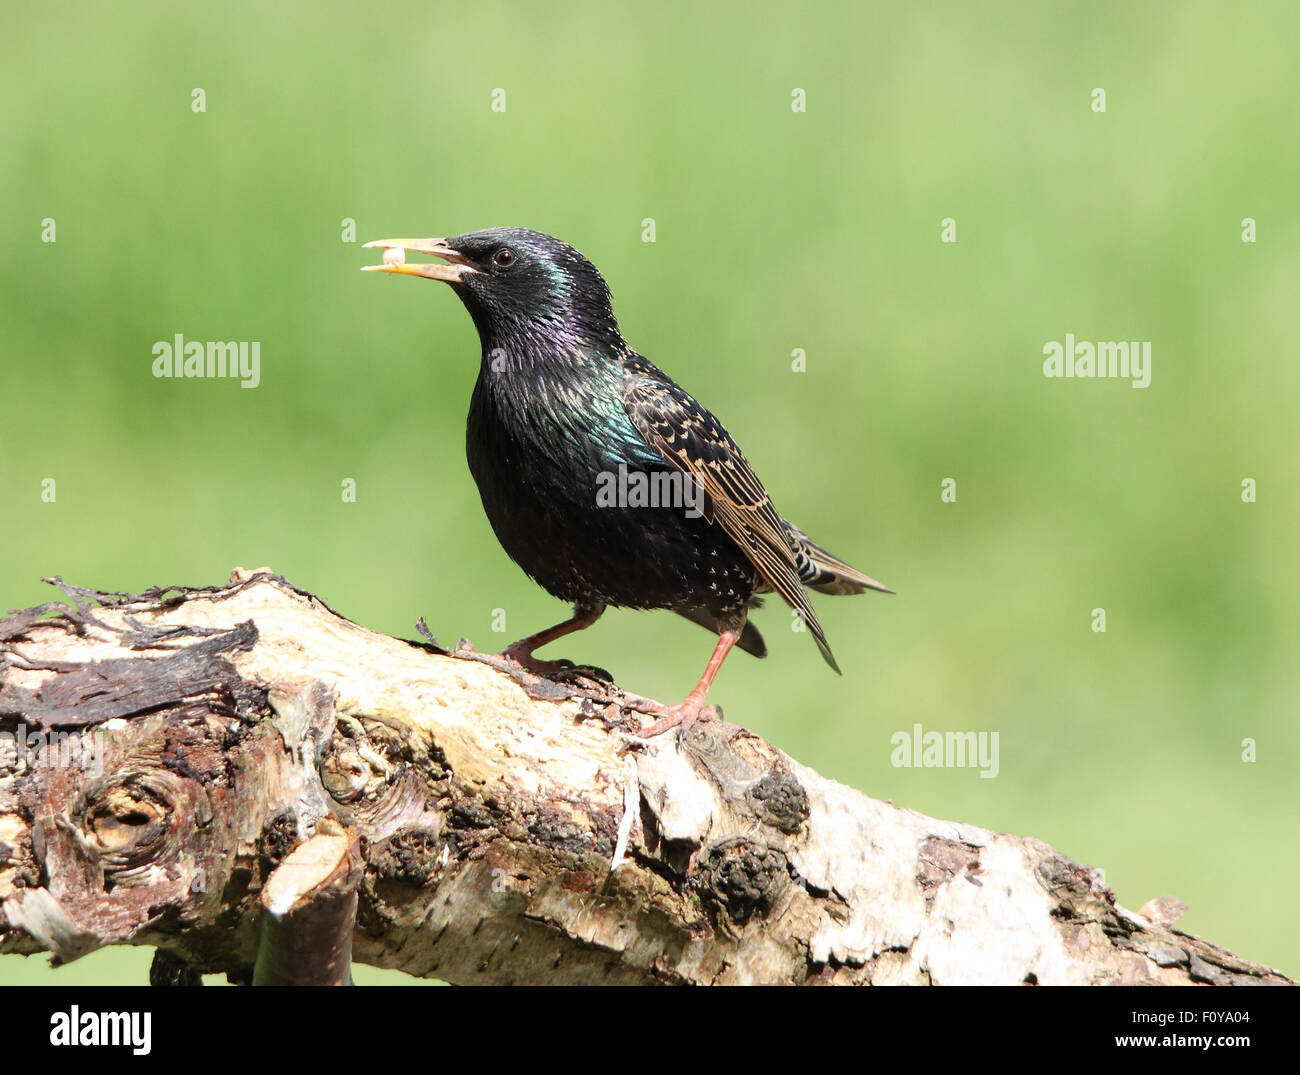 A lovely Common Starling, also known as European Starling or simply Starling, on a perch with a seed in its beak Stock Photo